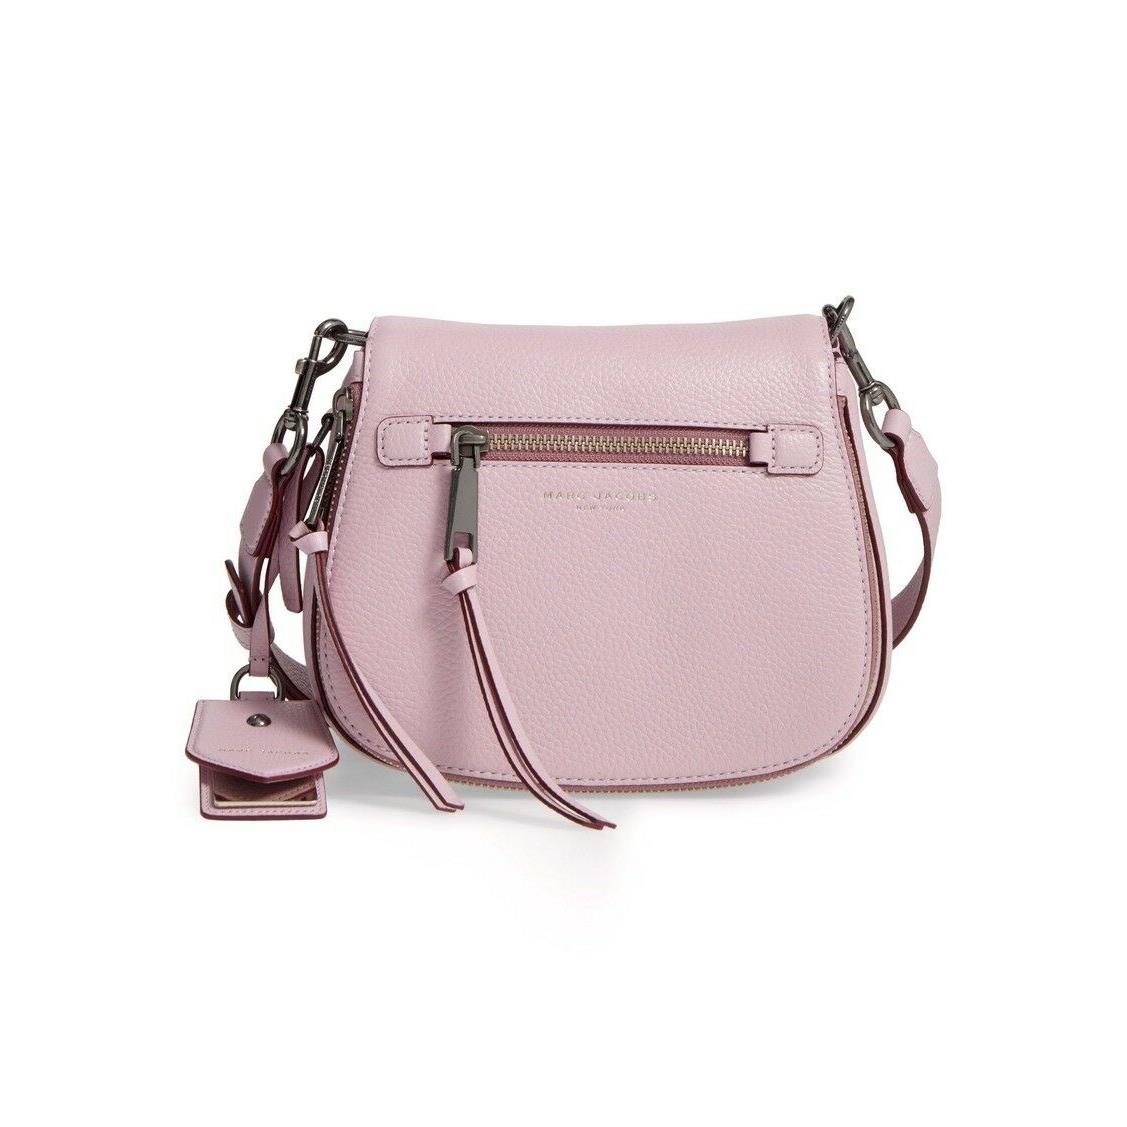 Marc Jacobs Small Recruit Nomad Pebbled Leather Crossbody Bag